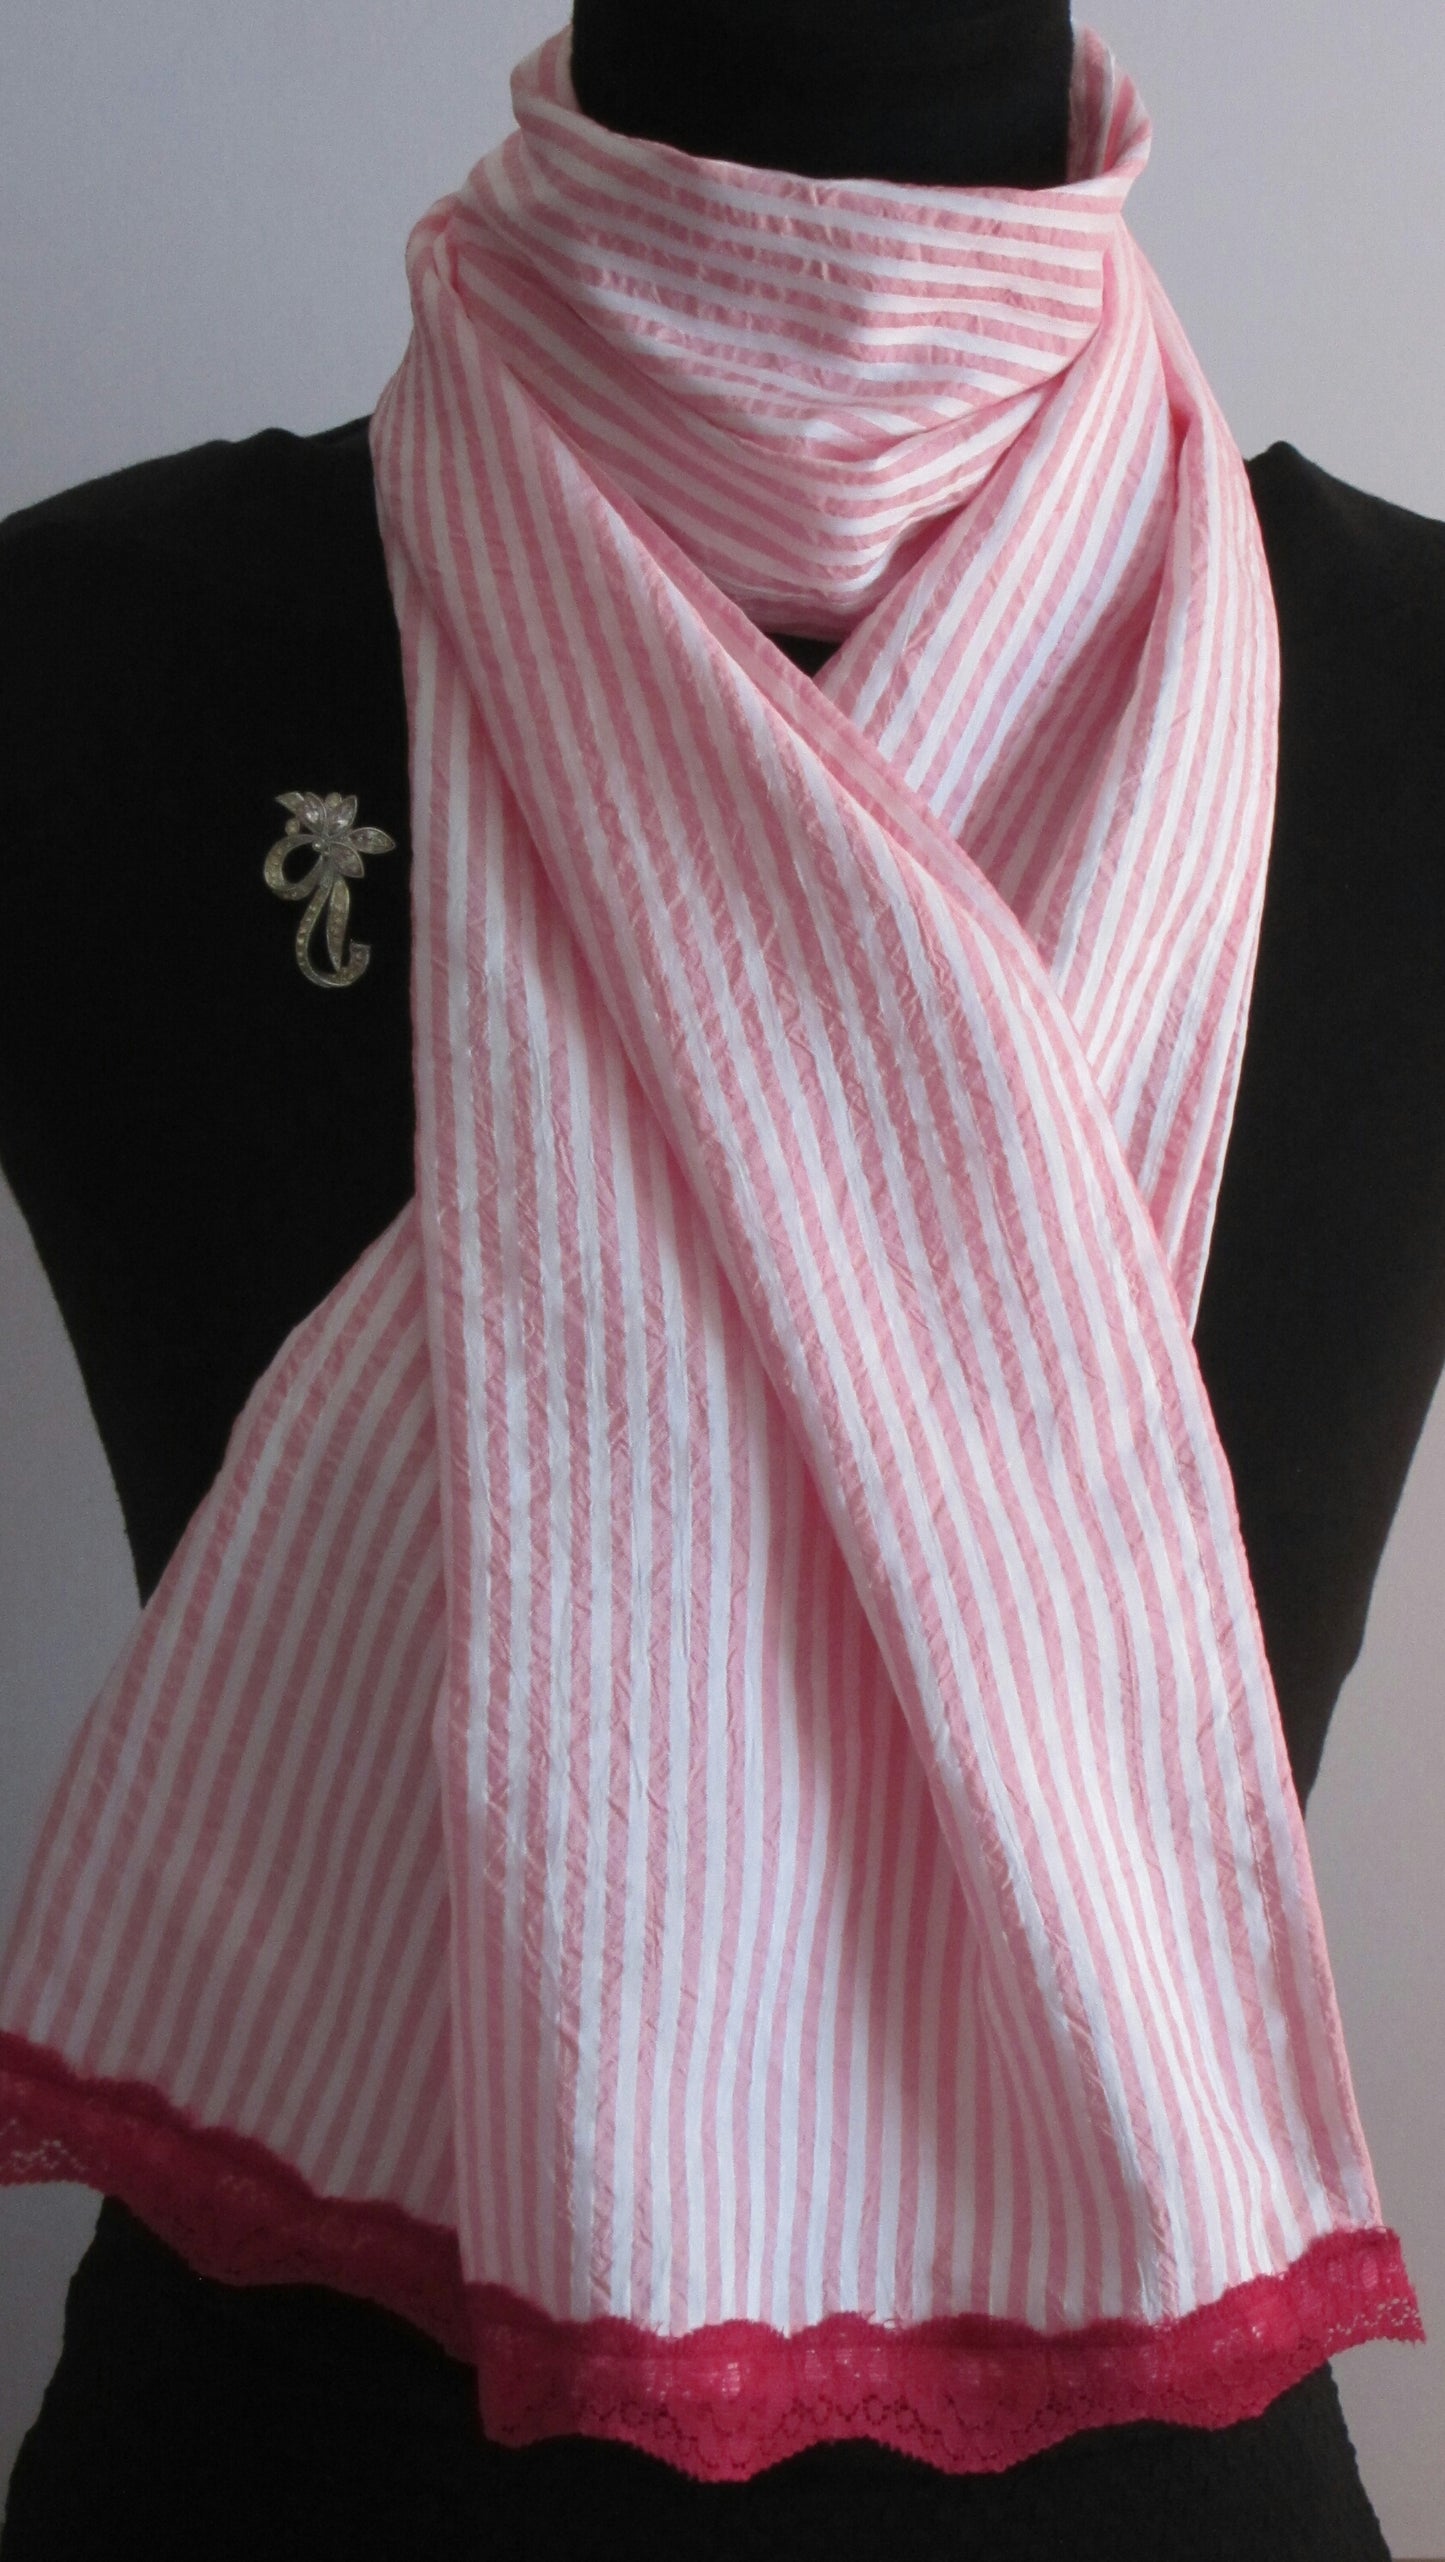 Ladies Cute Pink And White Candy Stripe Scarf With Dark Red Lace Trim